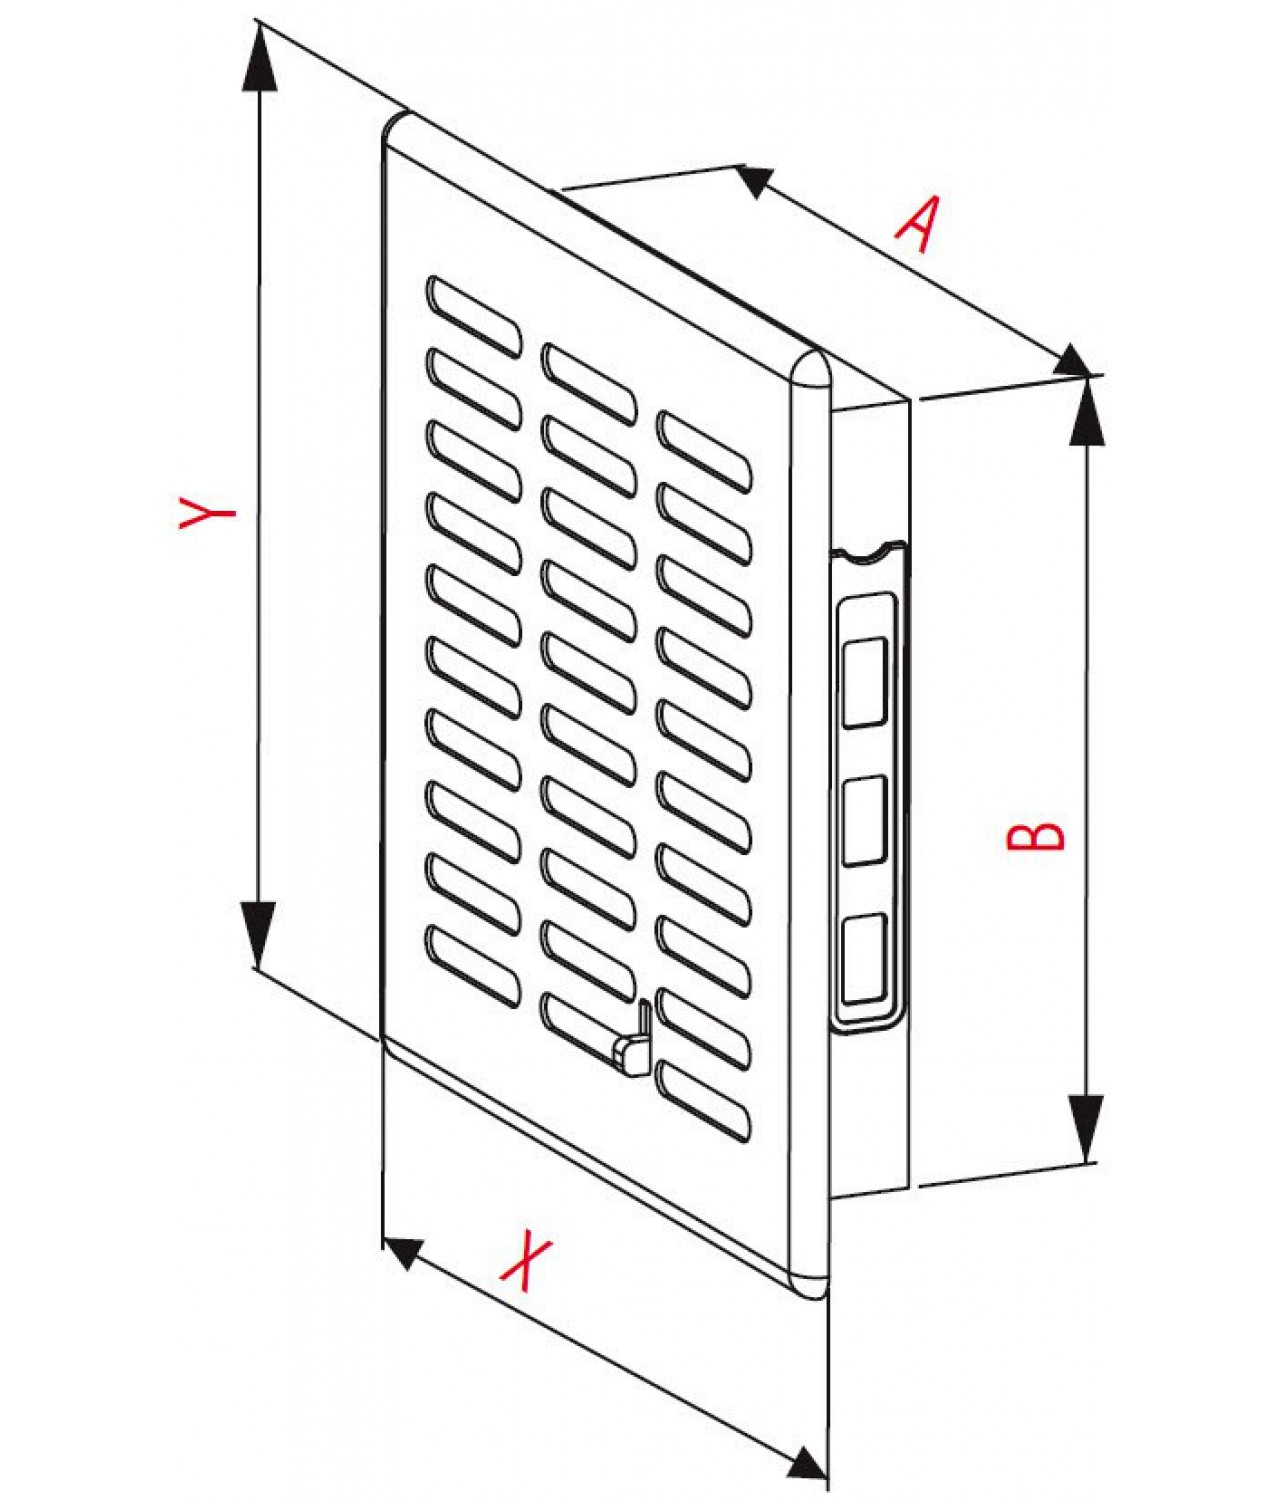 Vent cover with shutter GRT06, 165x235 mm - drawing